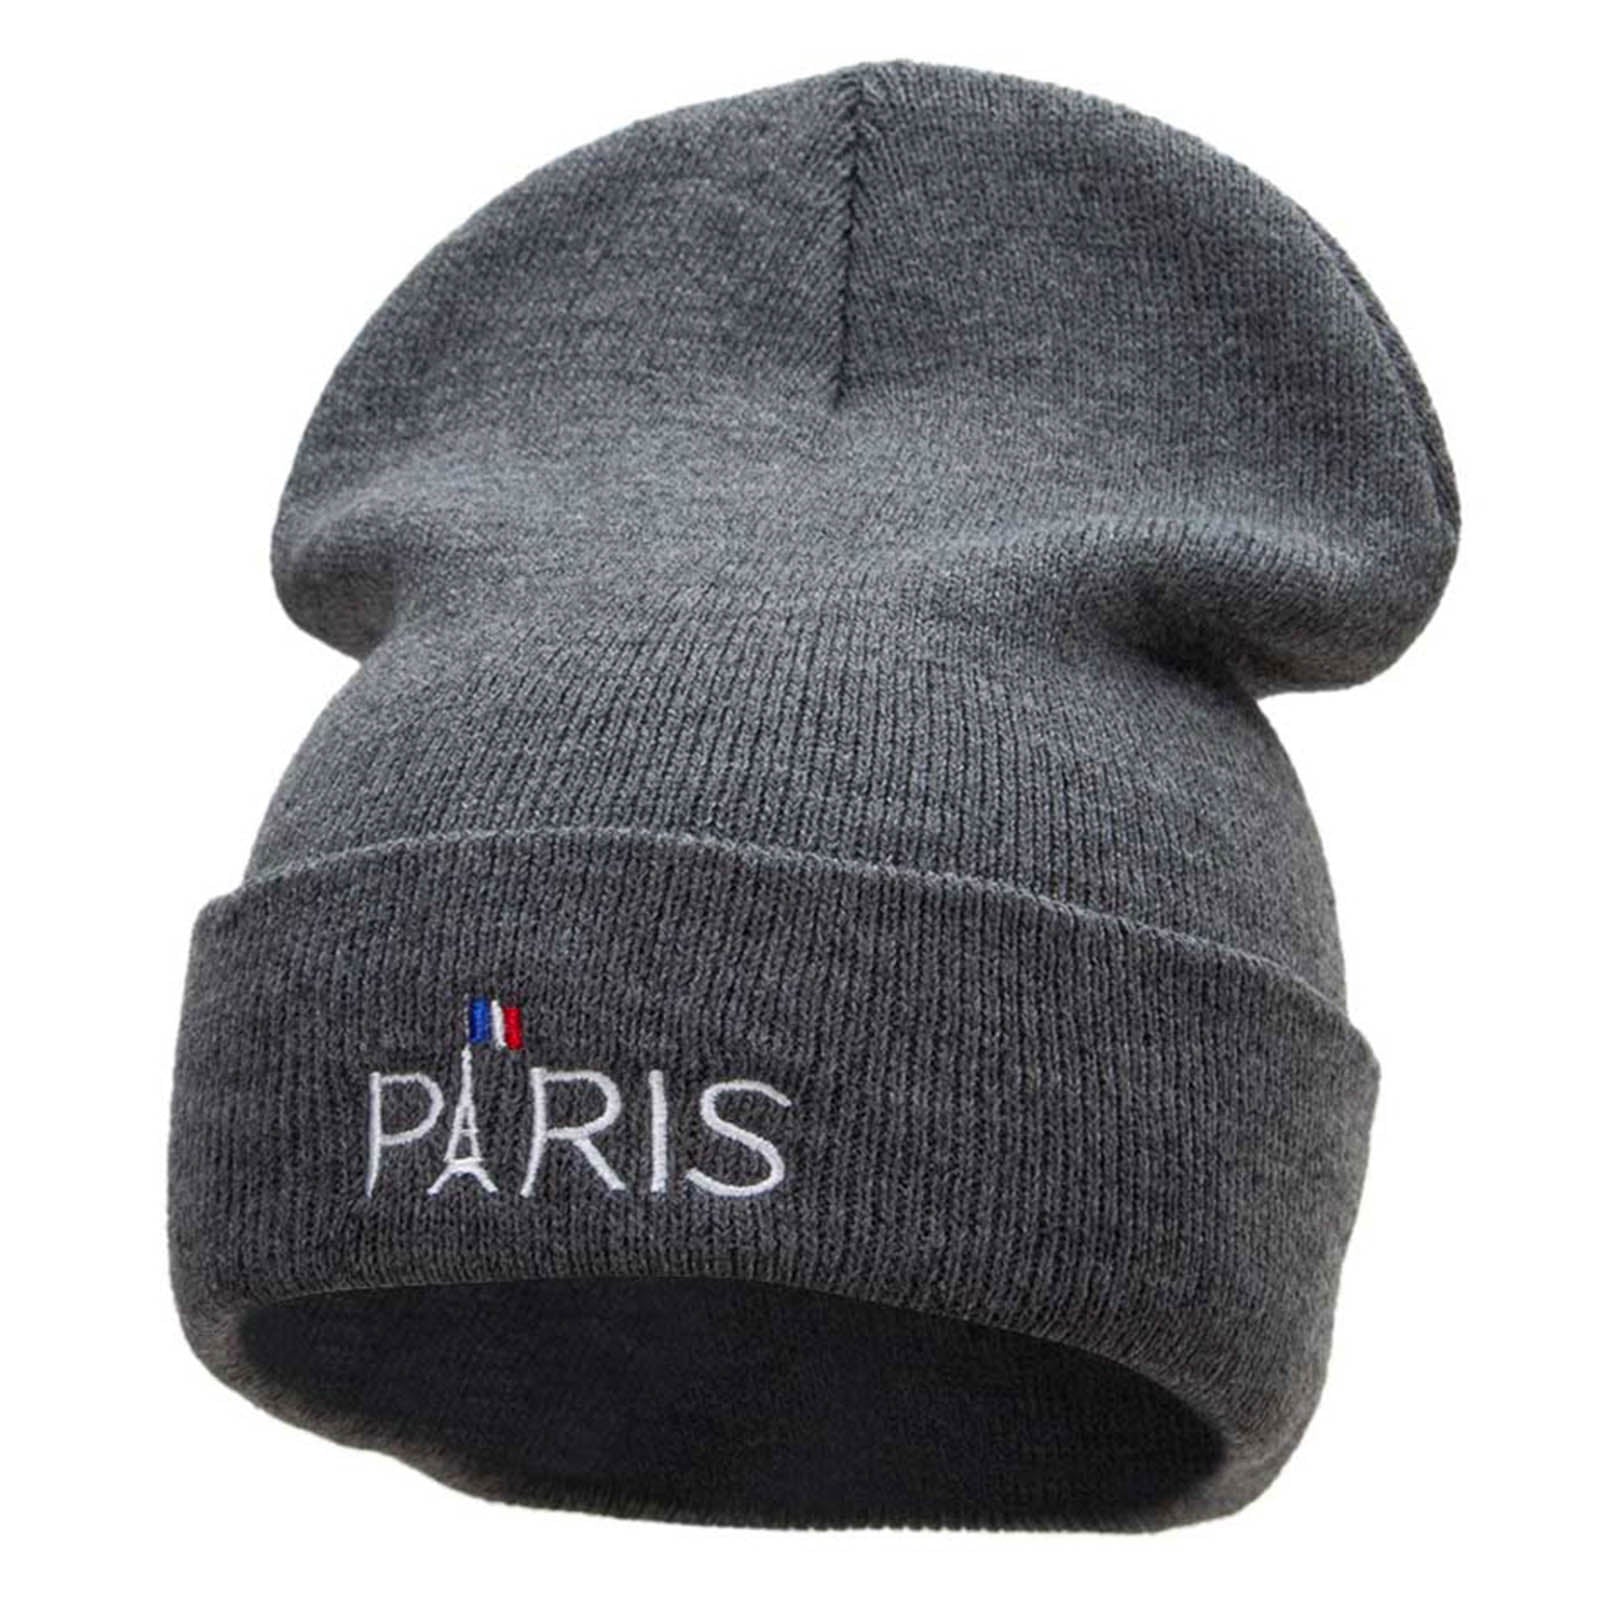 Eiffle Tower Paris Embroidered 12 Inch Long Knitted Beanie - Dk Grey OSFM